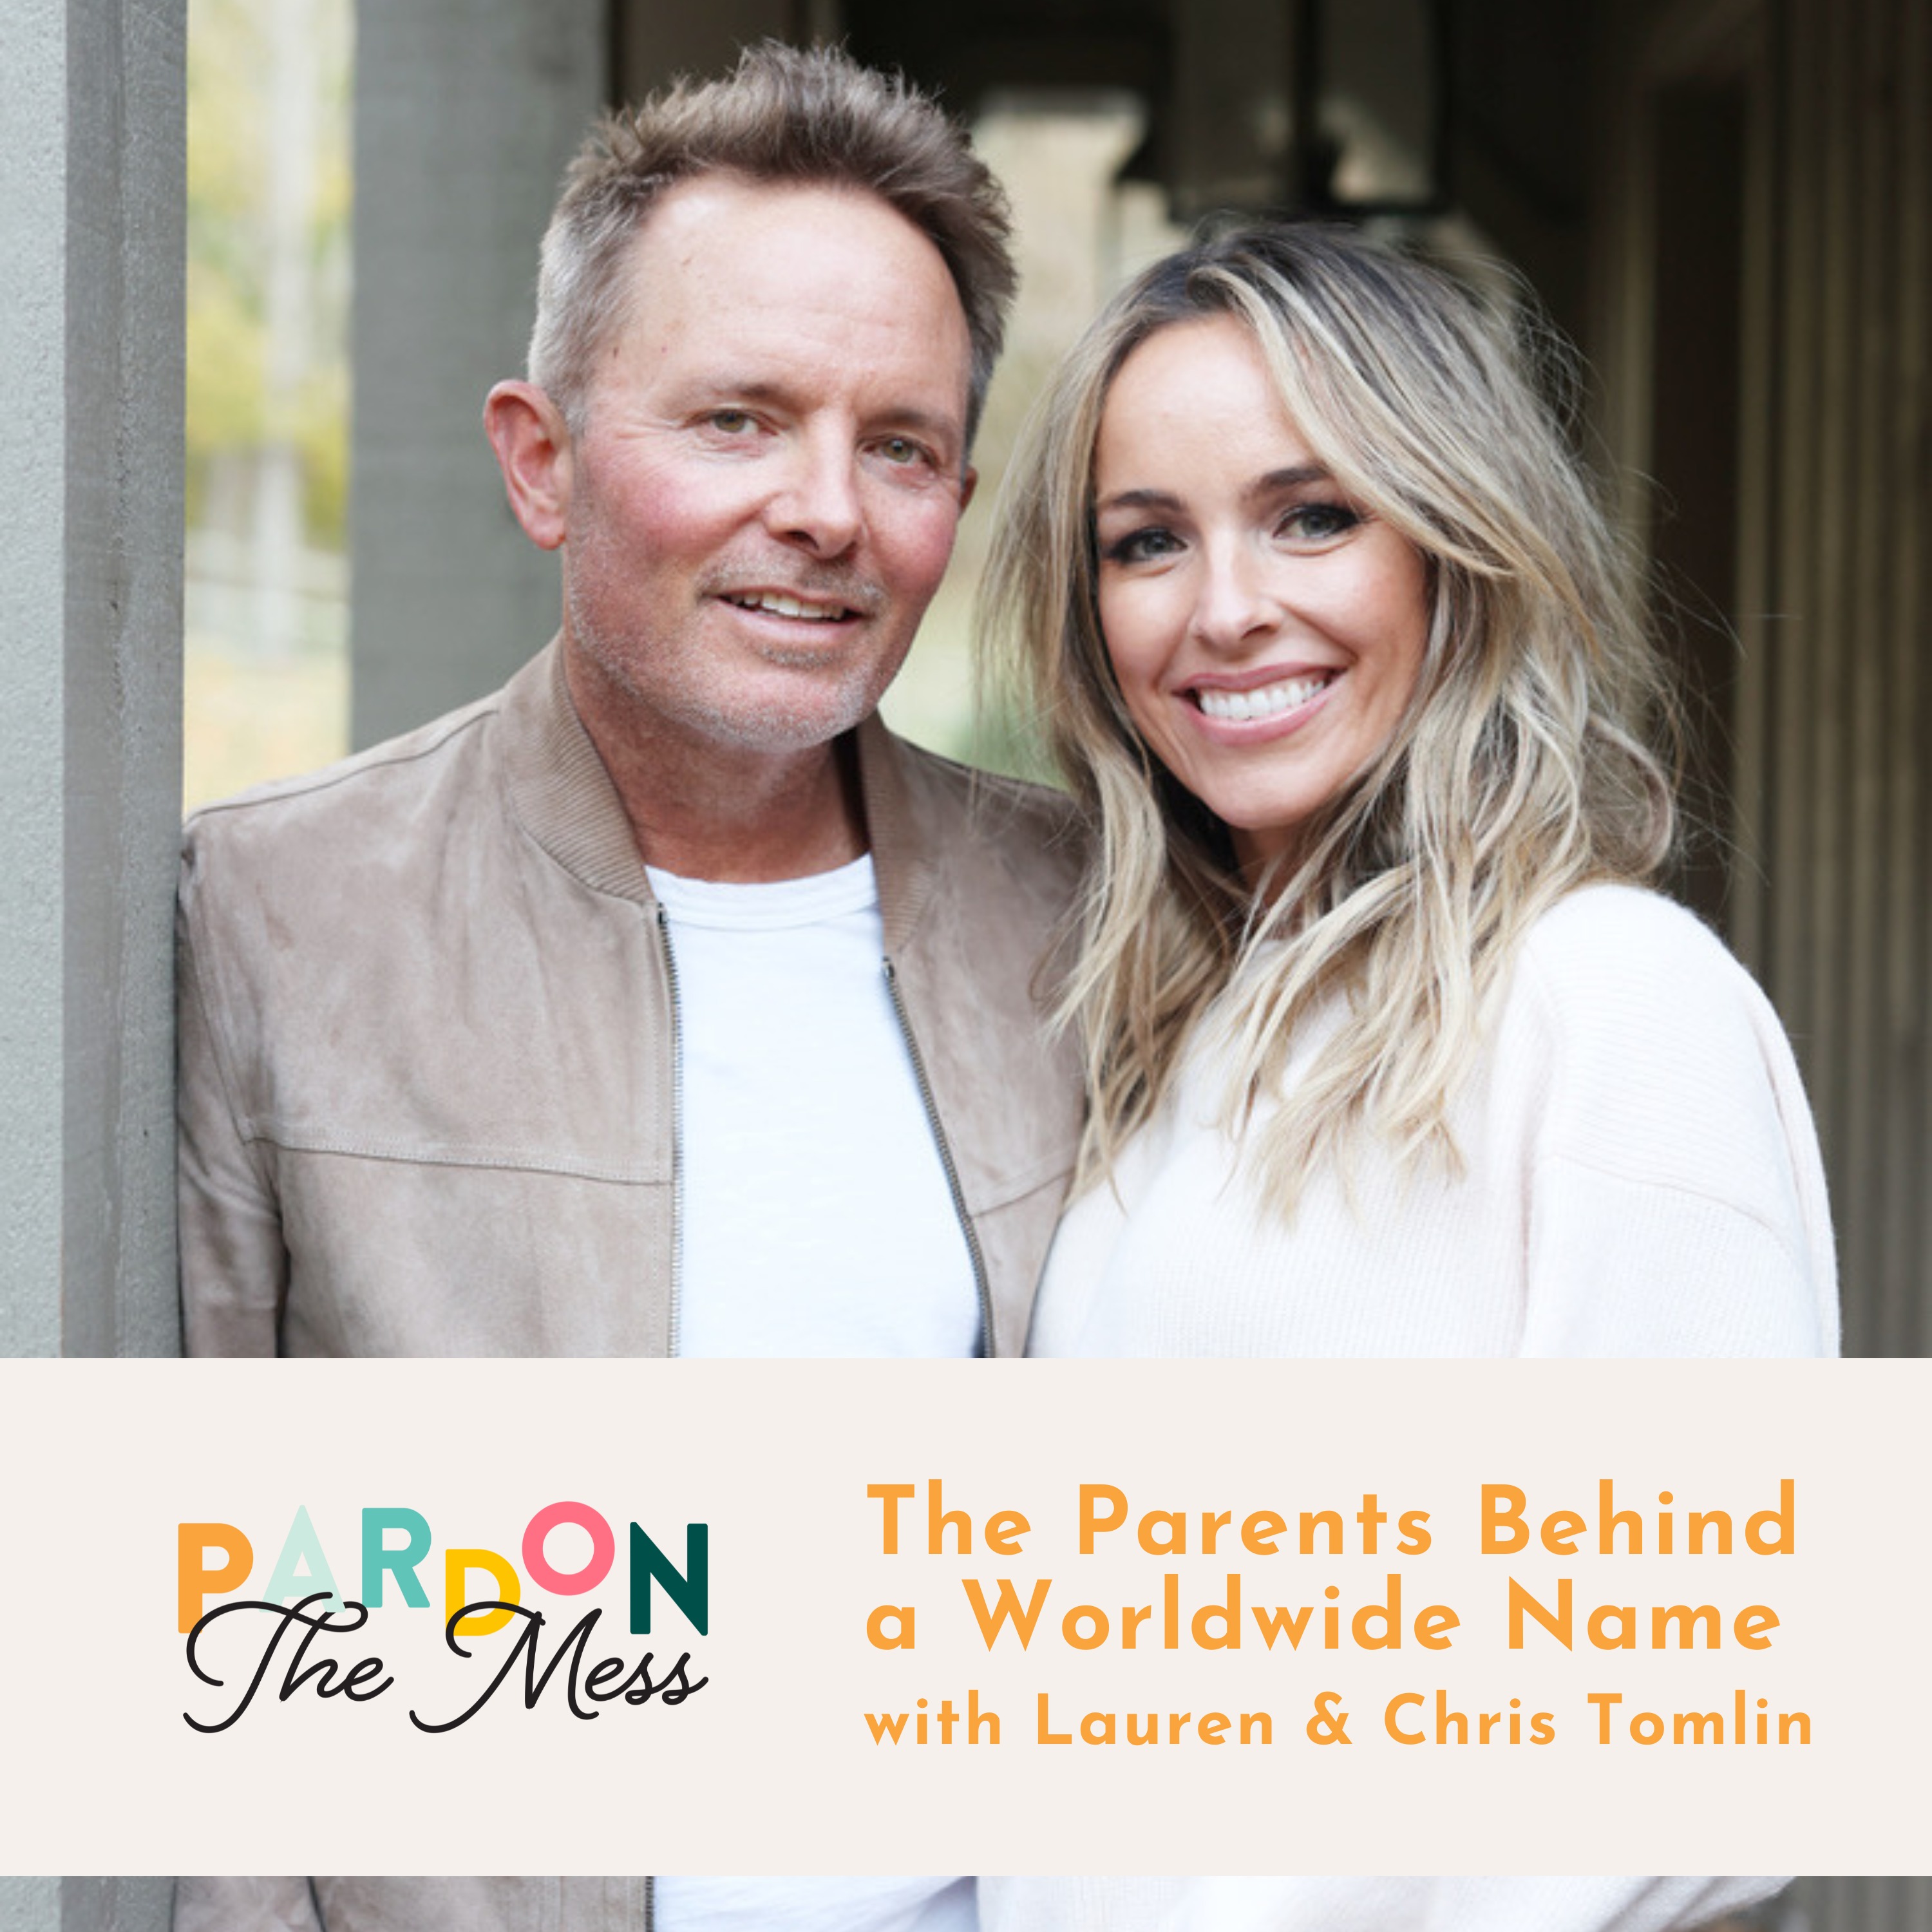 The Parents Behind a Worldwide Name with Lauren & Chris Tomlin